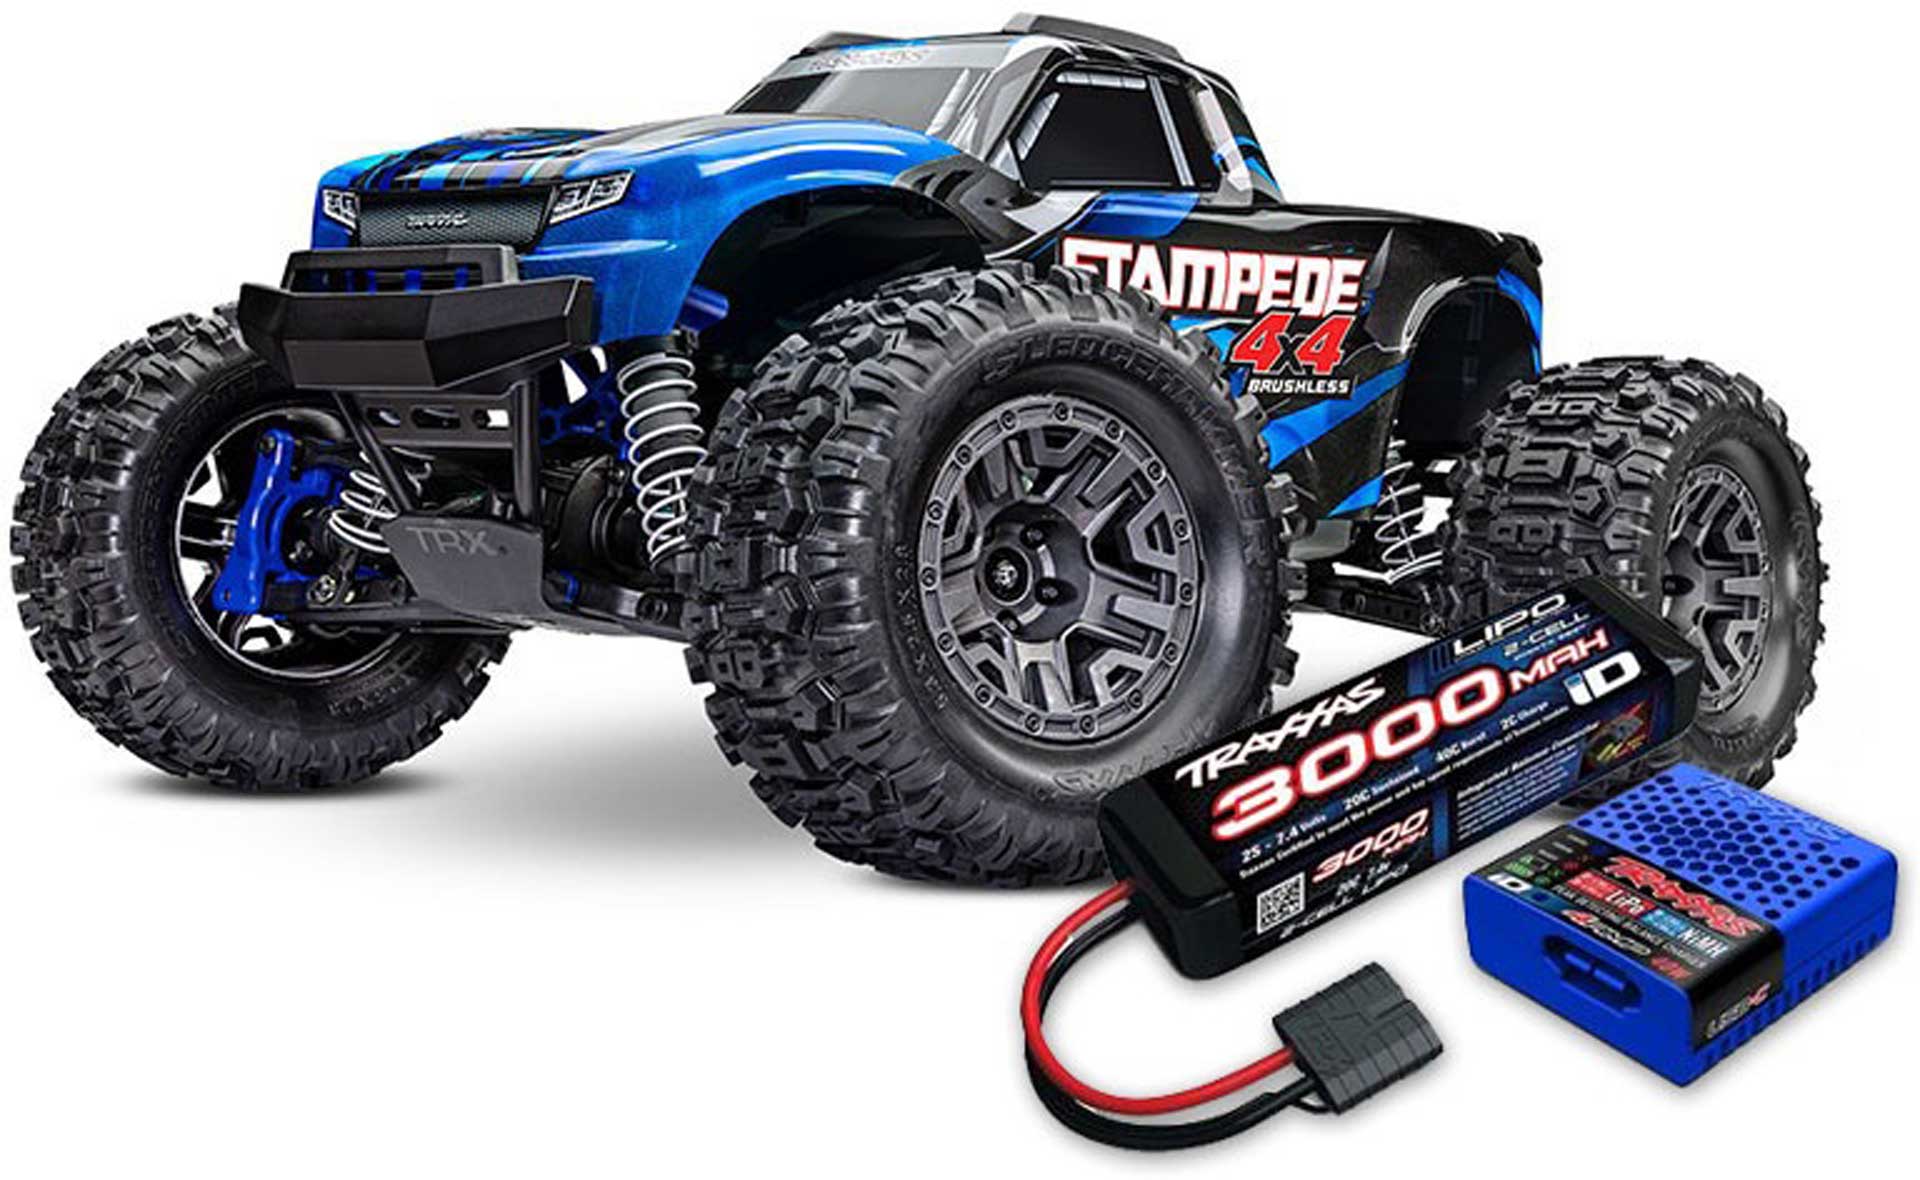 TRAXXAS STAMPEDE 4X4 BL-2S BLUE 1/10 MONSTER TRUCK RTR BL-2S SET WITH FREE LIPO BATTE